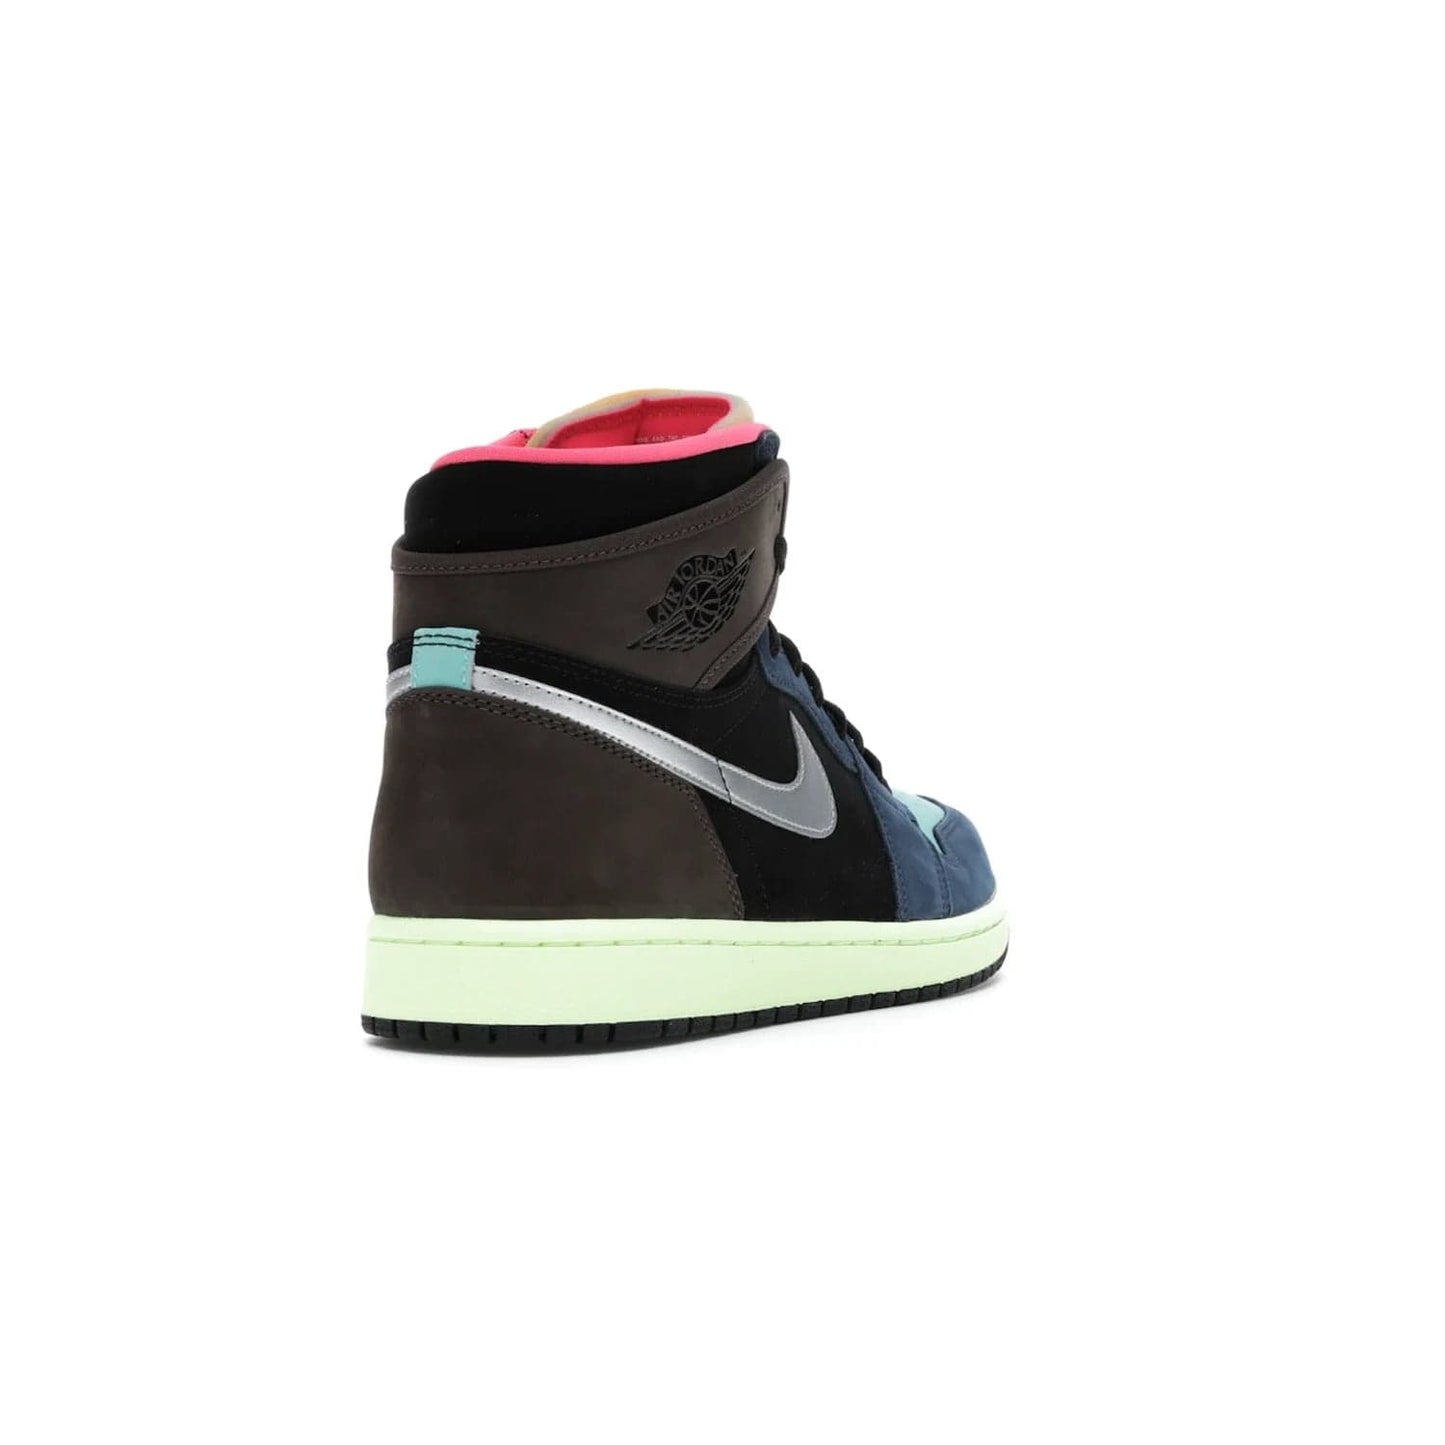 Jordan 1 Retro High Tokyo Bio Hack - Image 31 - Only at www.BallersClubKickz.com - Step up your sneaker game with the Air Jordan 1 Retro High Tokyo Bio Hack! Unique design featuring multiple materials and eye-catching colors. Metallic leather Swoosh and light green midsole for a stunning look. Available now for just $170.